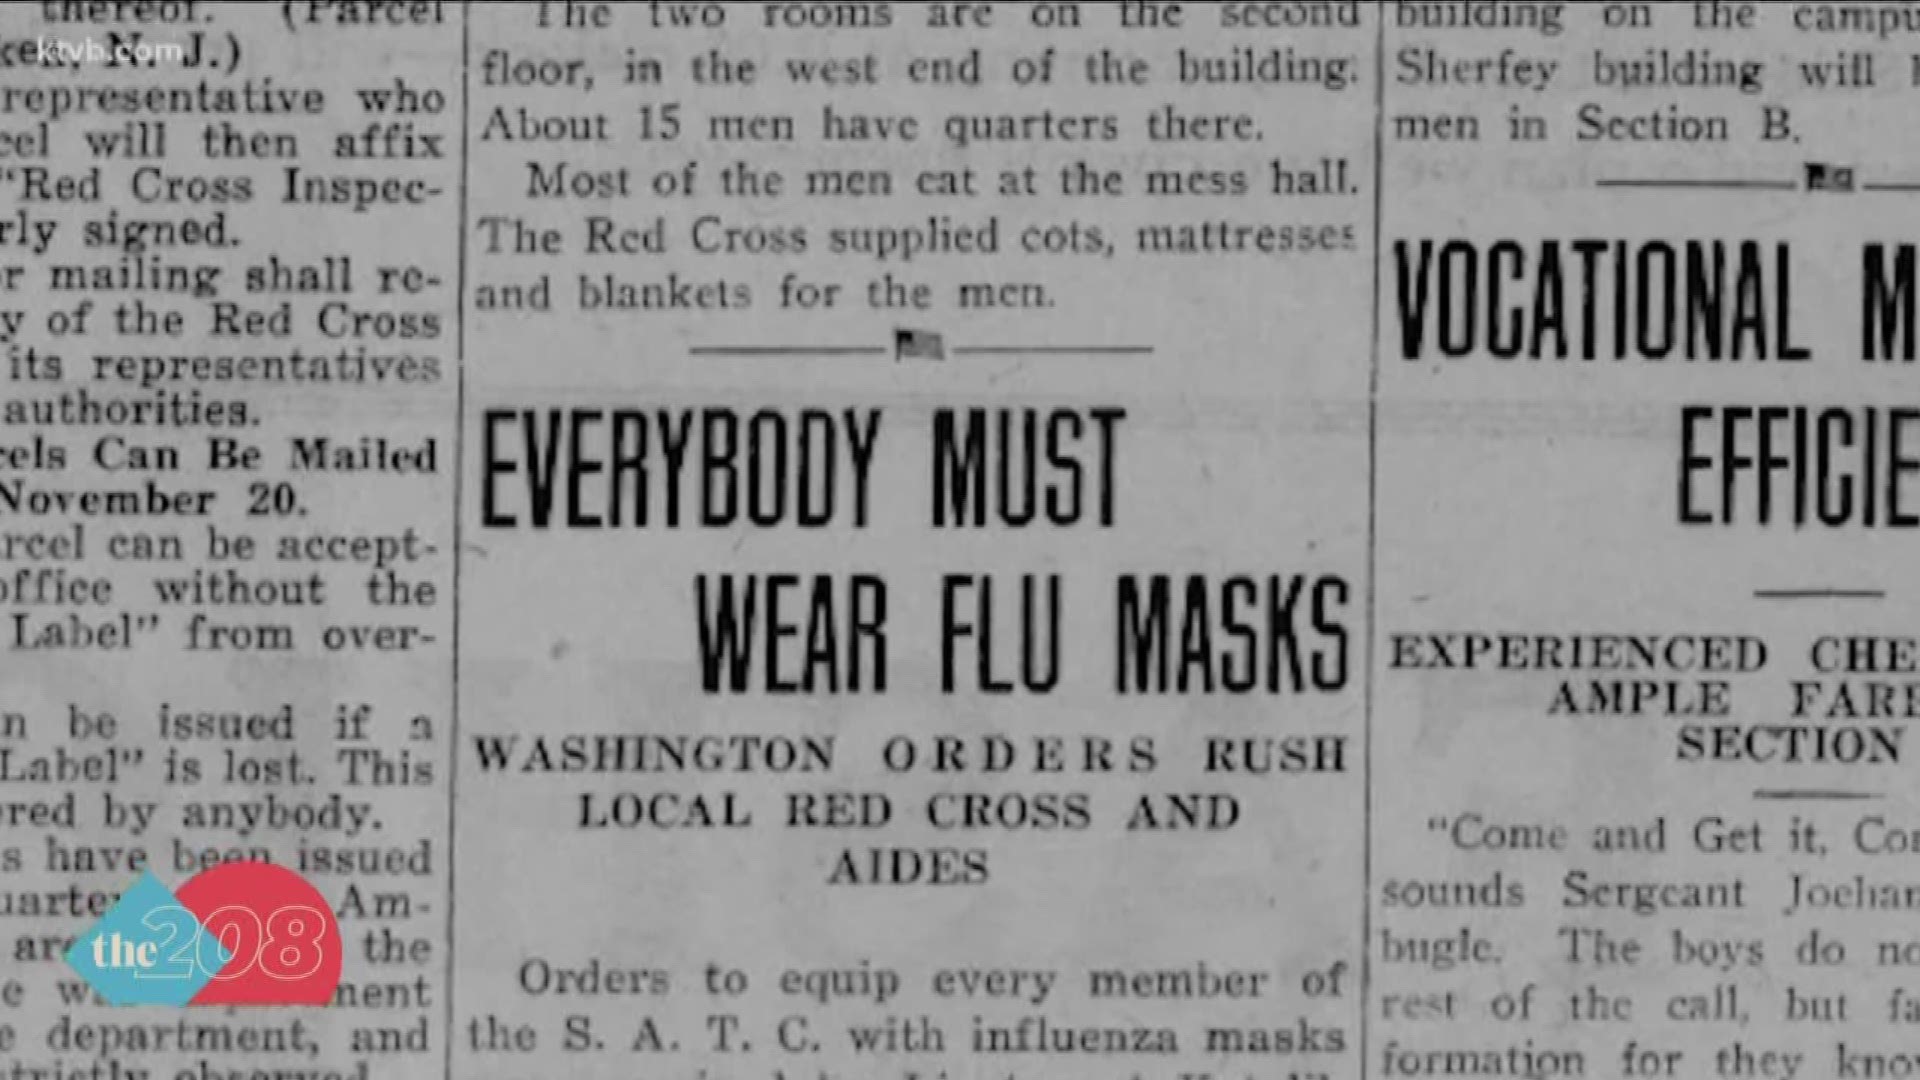 We took a look back at what newspapers were publishing in 1918 about wearing a mask in public.